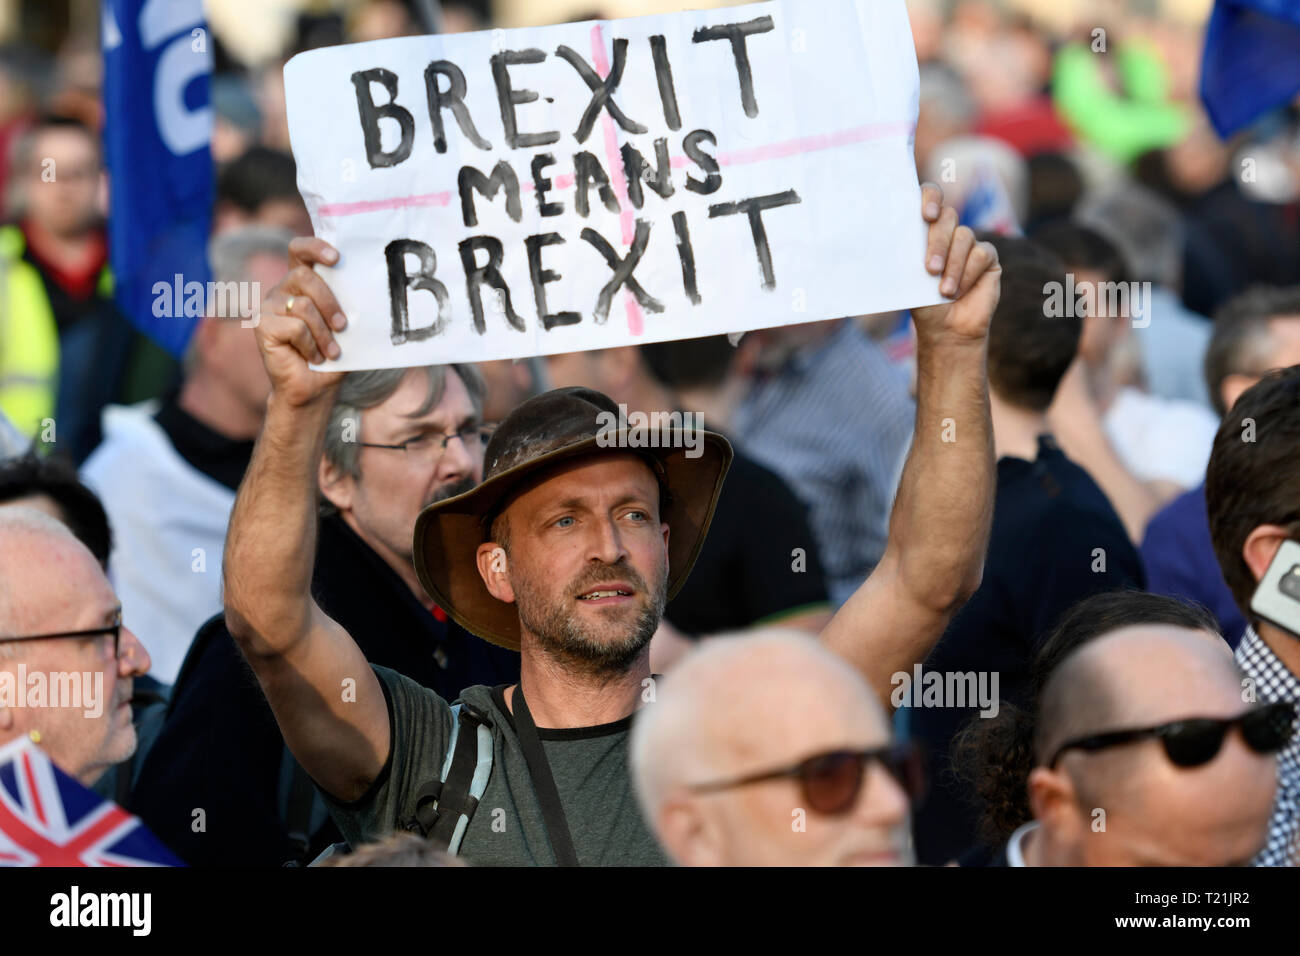 A protester seen holding a placard that says “Brexit means Brexit' during the Leave means leave rally in London.  A Leave means leave pro Brexit march begun on March 16 in Sunderland, UK and ended with a rally in Parliament Square on March 29 in London, same day that UK has been scheduled to leave the European Union. Pro Brexit protesters gathered at Parliament Square to demand from the government to deliver what was promised and leave the European Union without a deal. Nigel Farage and Tommy Robinson were seen giving speeches to their supporters in different stages during the pro Brexit prote Stock Photo